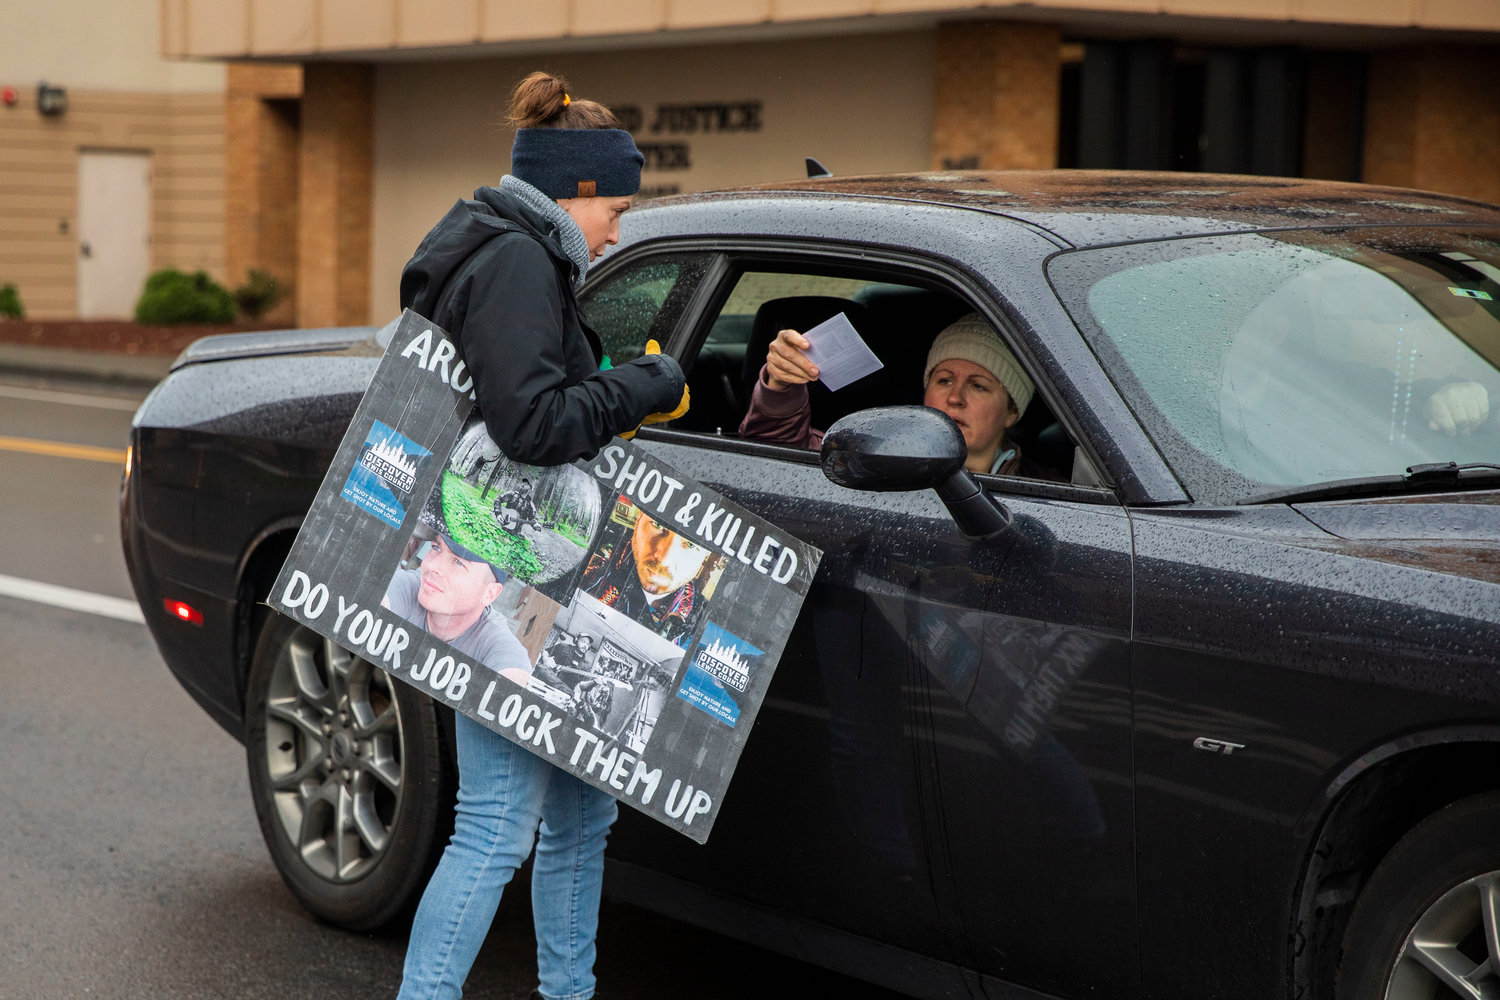 Flyers are handed to drivers outside the Lewis County Courthouse as protesters demand justice for Aron Christensen and his dog Buzzo in Chehalis on Sunday.